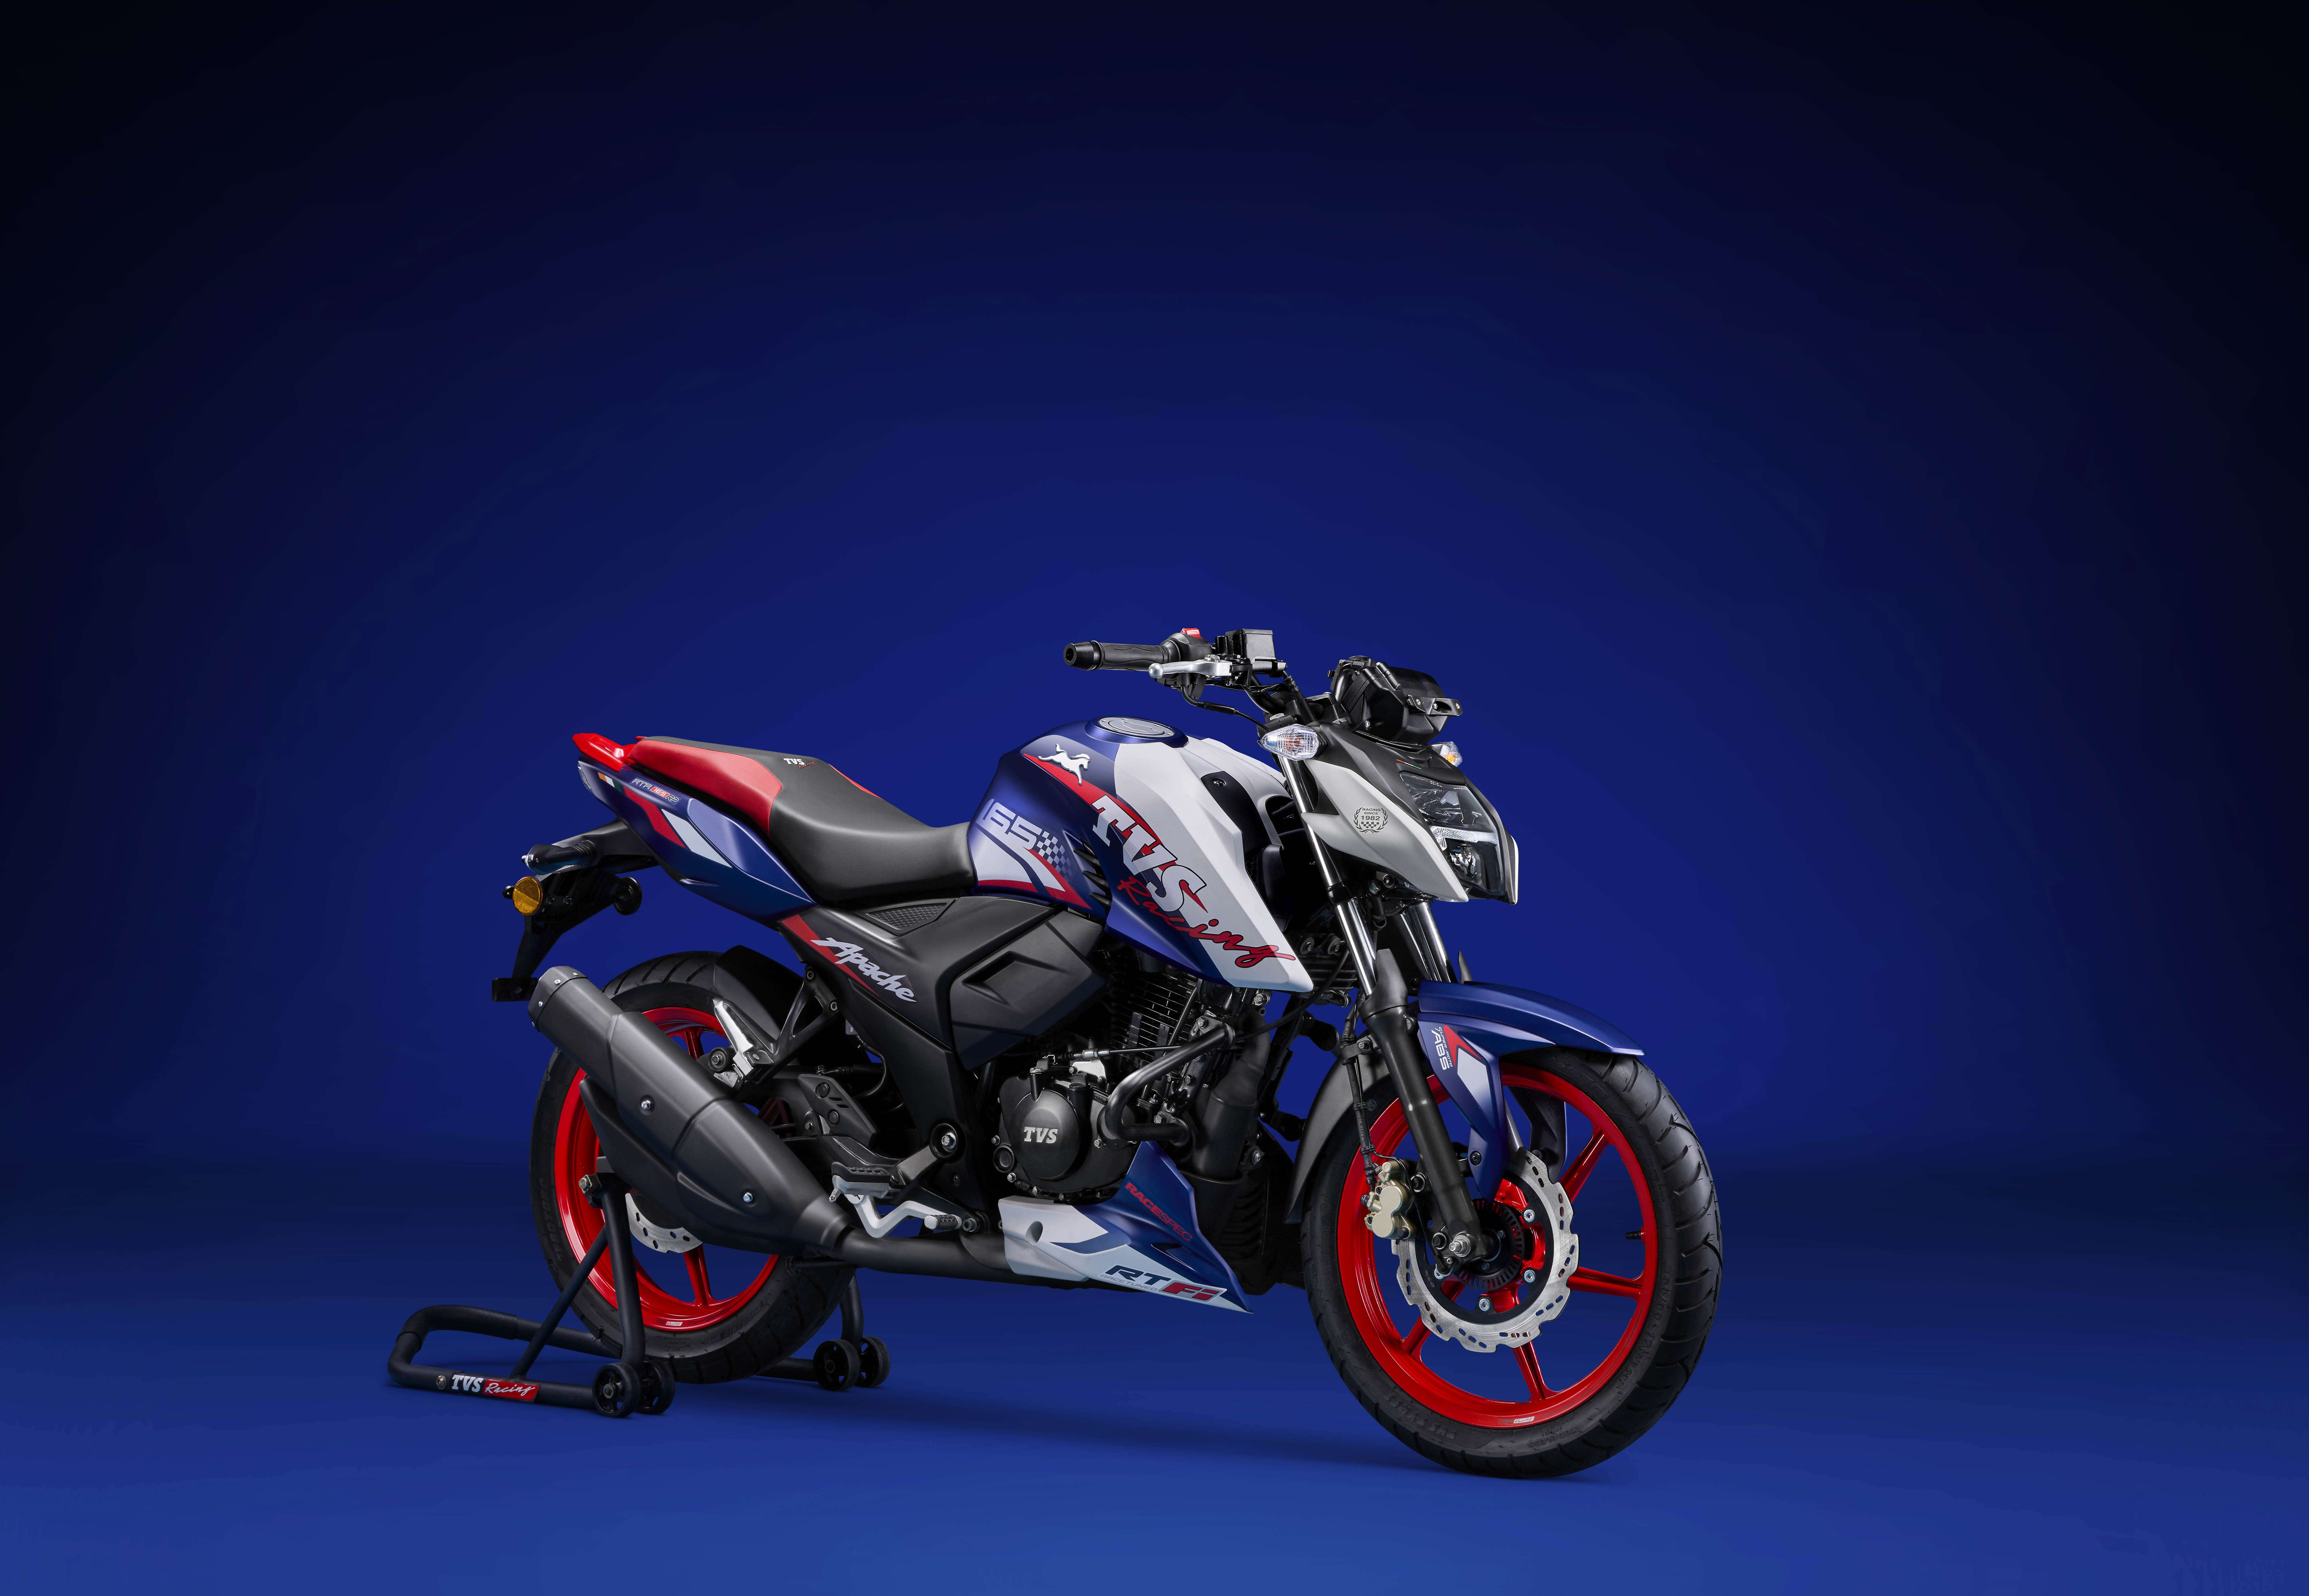 TVS Motor Company announces Race Performance series, inspired from TVS Racing’s race machine lineage decoding=